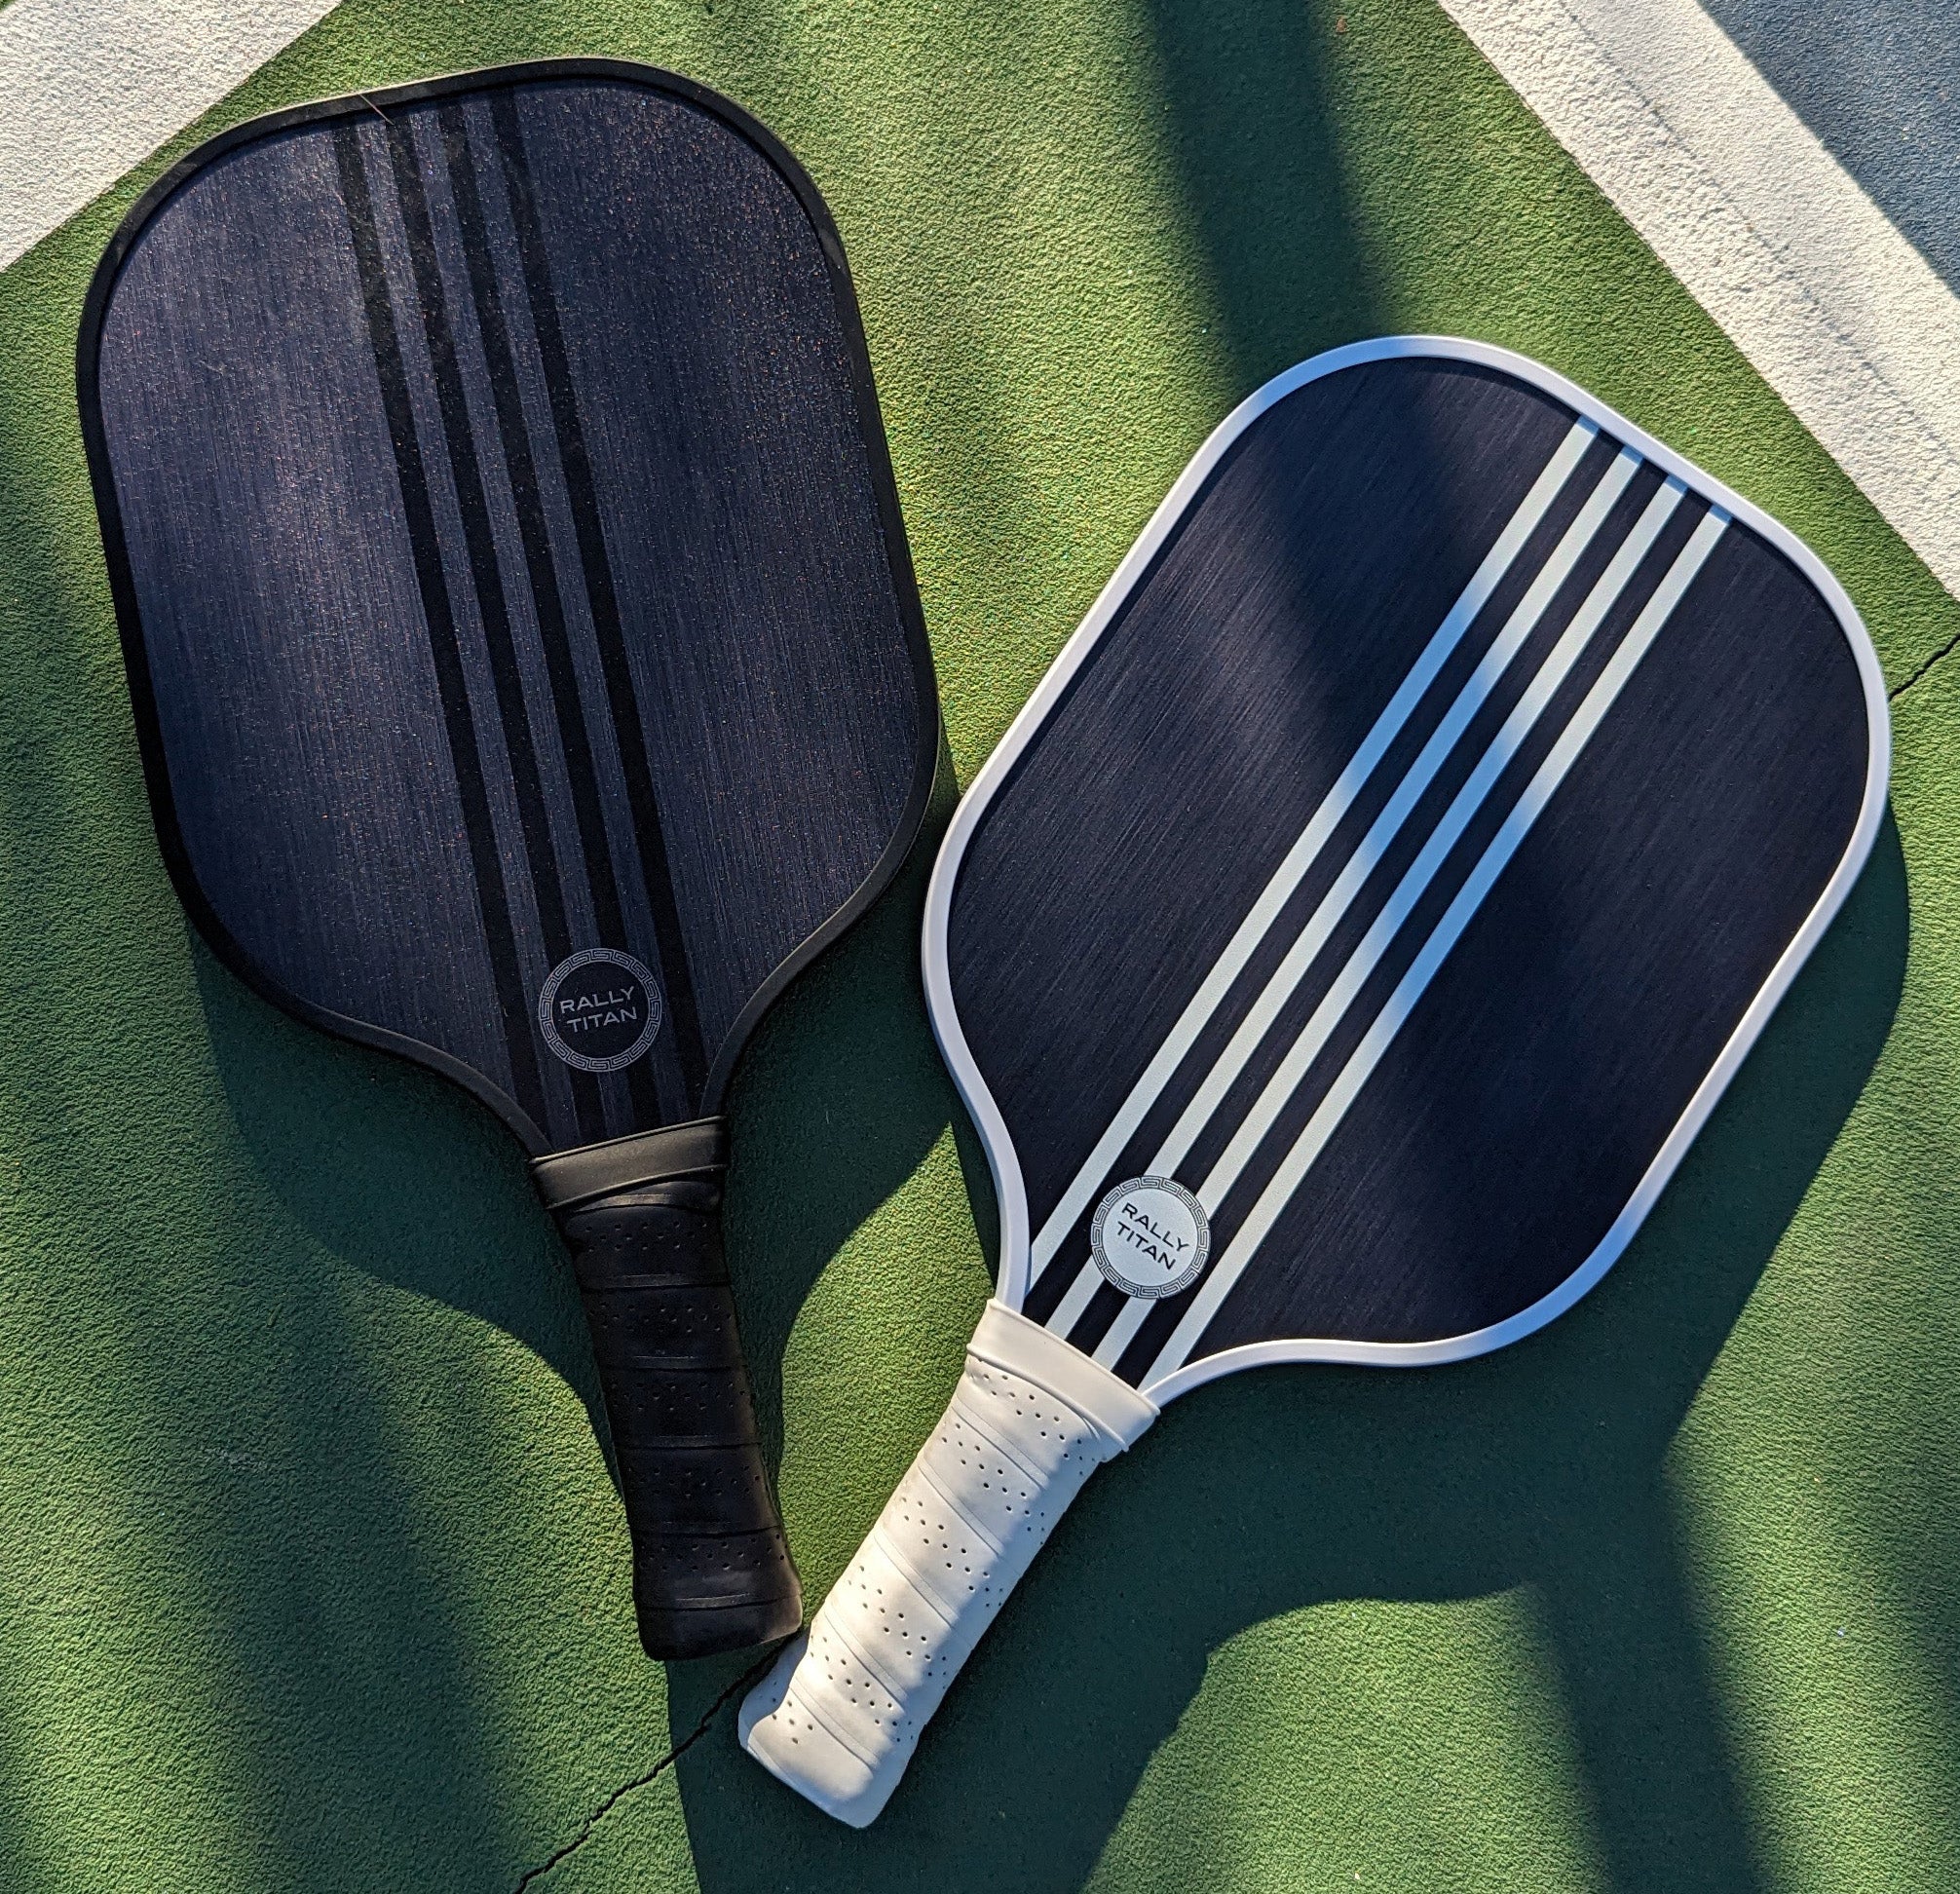 Top 5 Features to Look for in High-Quality Pickleball Paddles